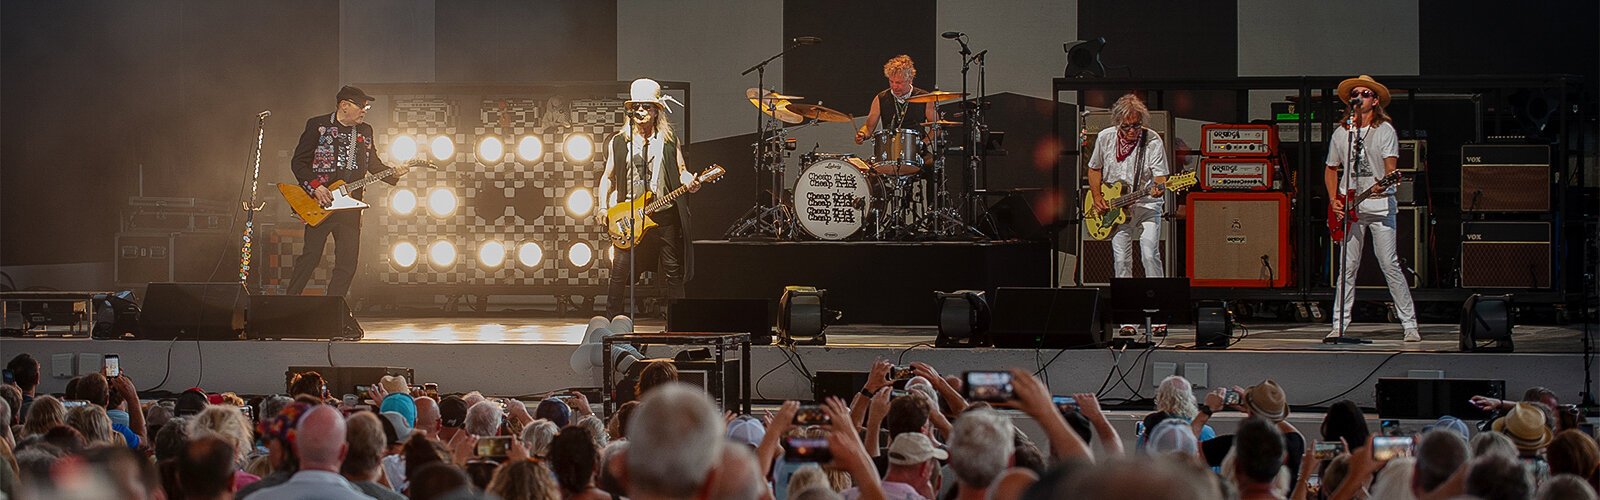 The rock band Cheap Trick played a free concert for the opening of The Sound, the new amphitheater venue at Clearwater's Coachman Park.The opening act was Robin Taylor Zander, the son of Cheap Trick singer Robin Zander.